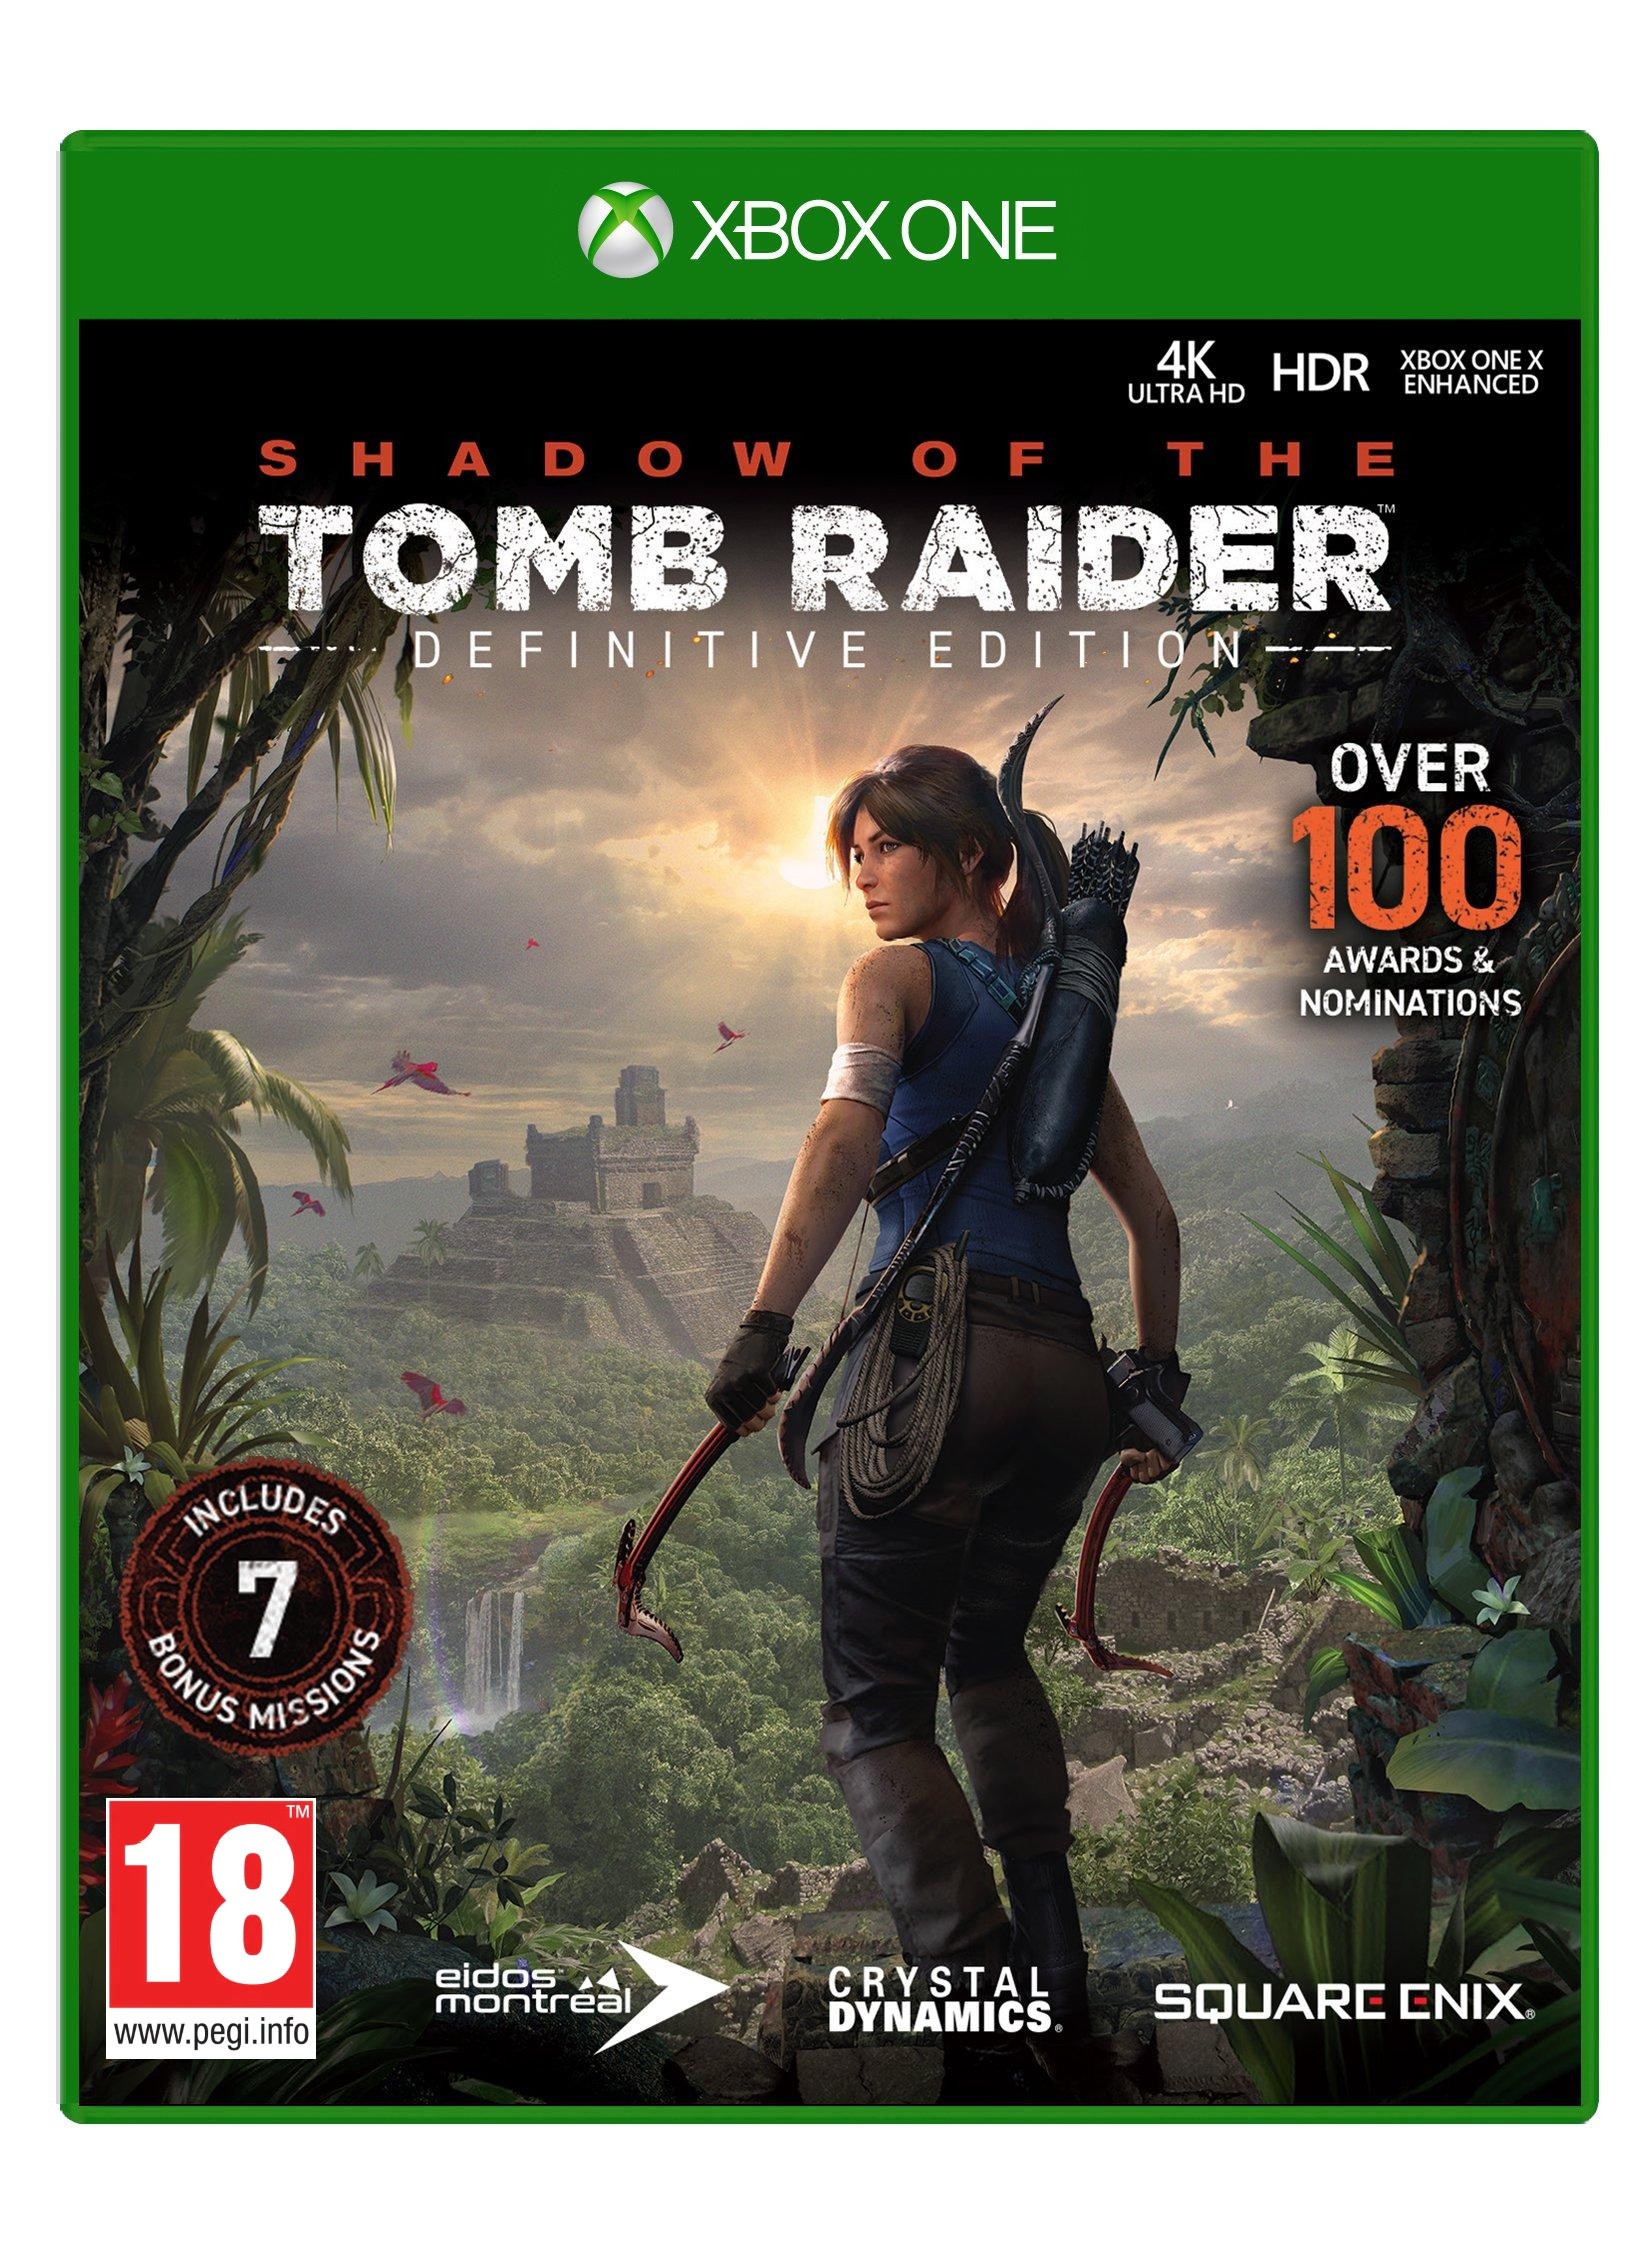 shadow of the tomb raider definitive edition vs standard